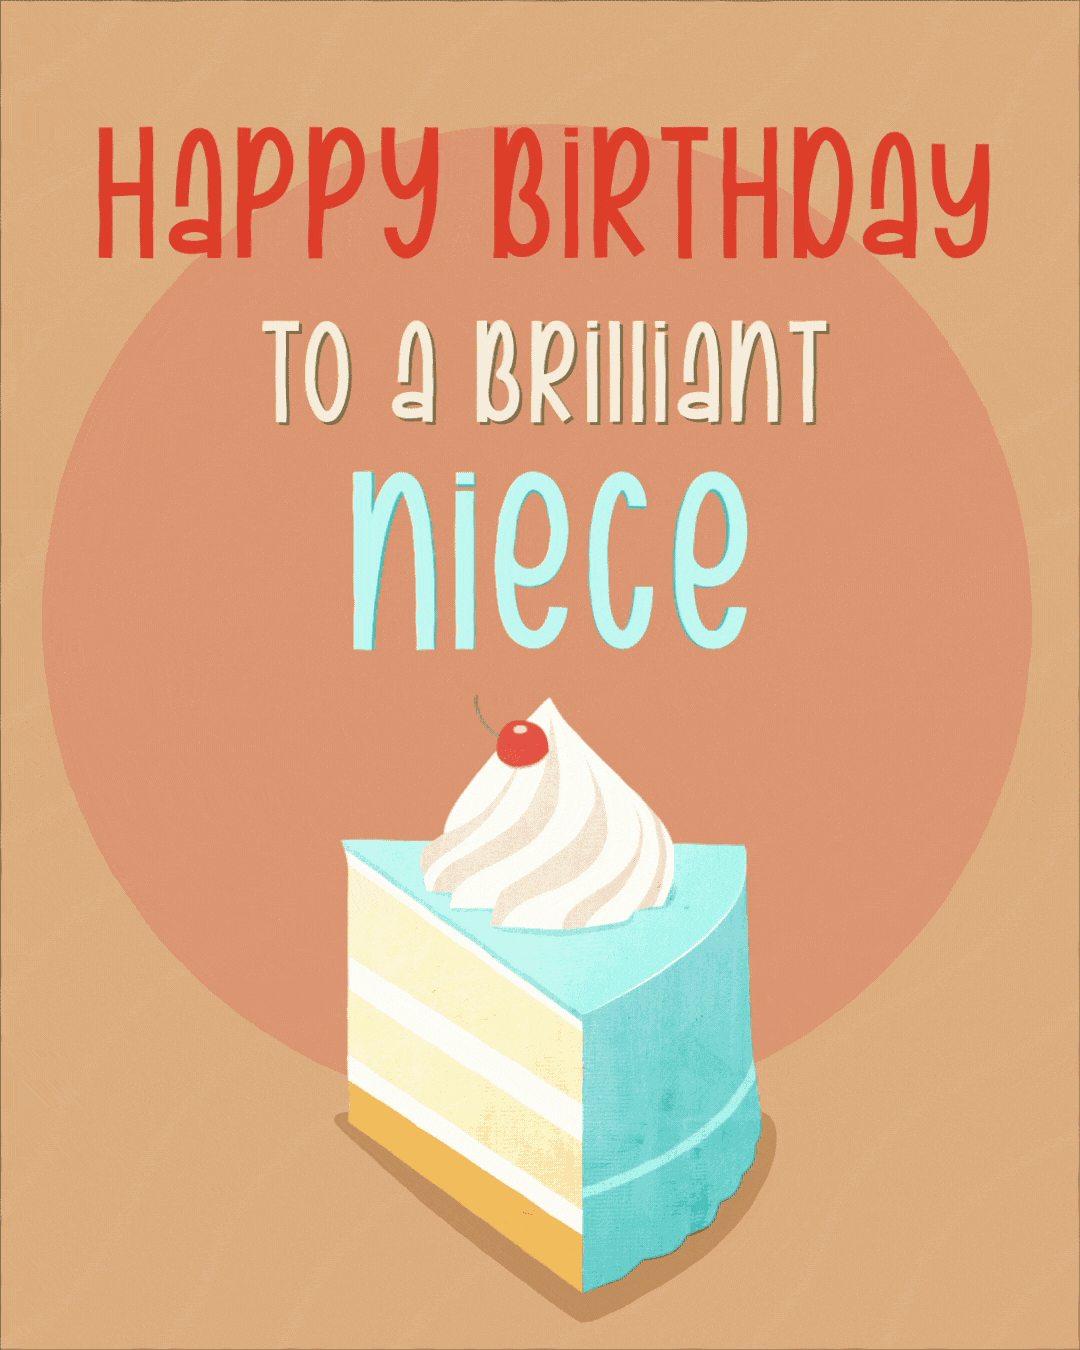 Free Happy Birthday Animated Images and GIFs for Niece 